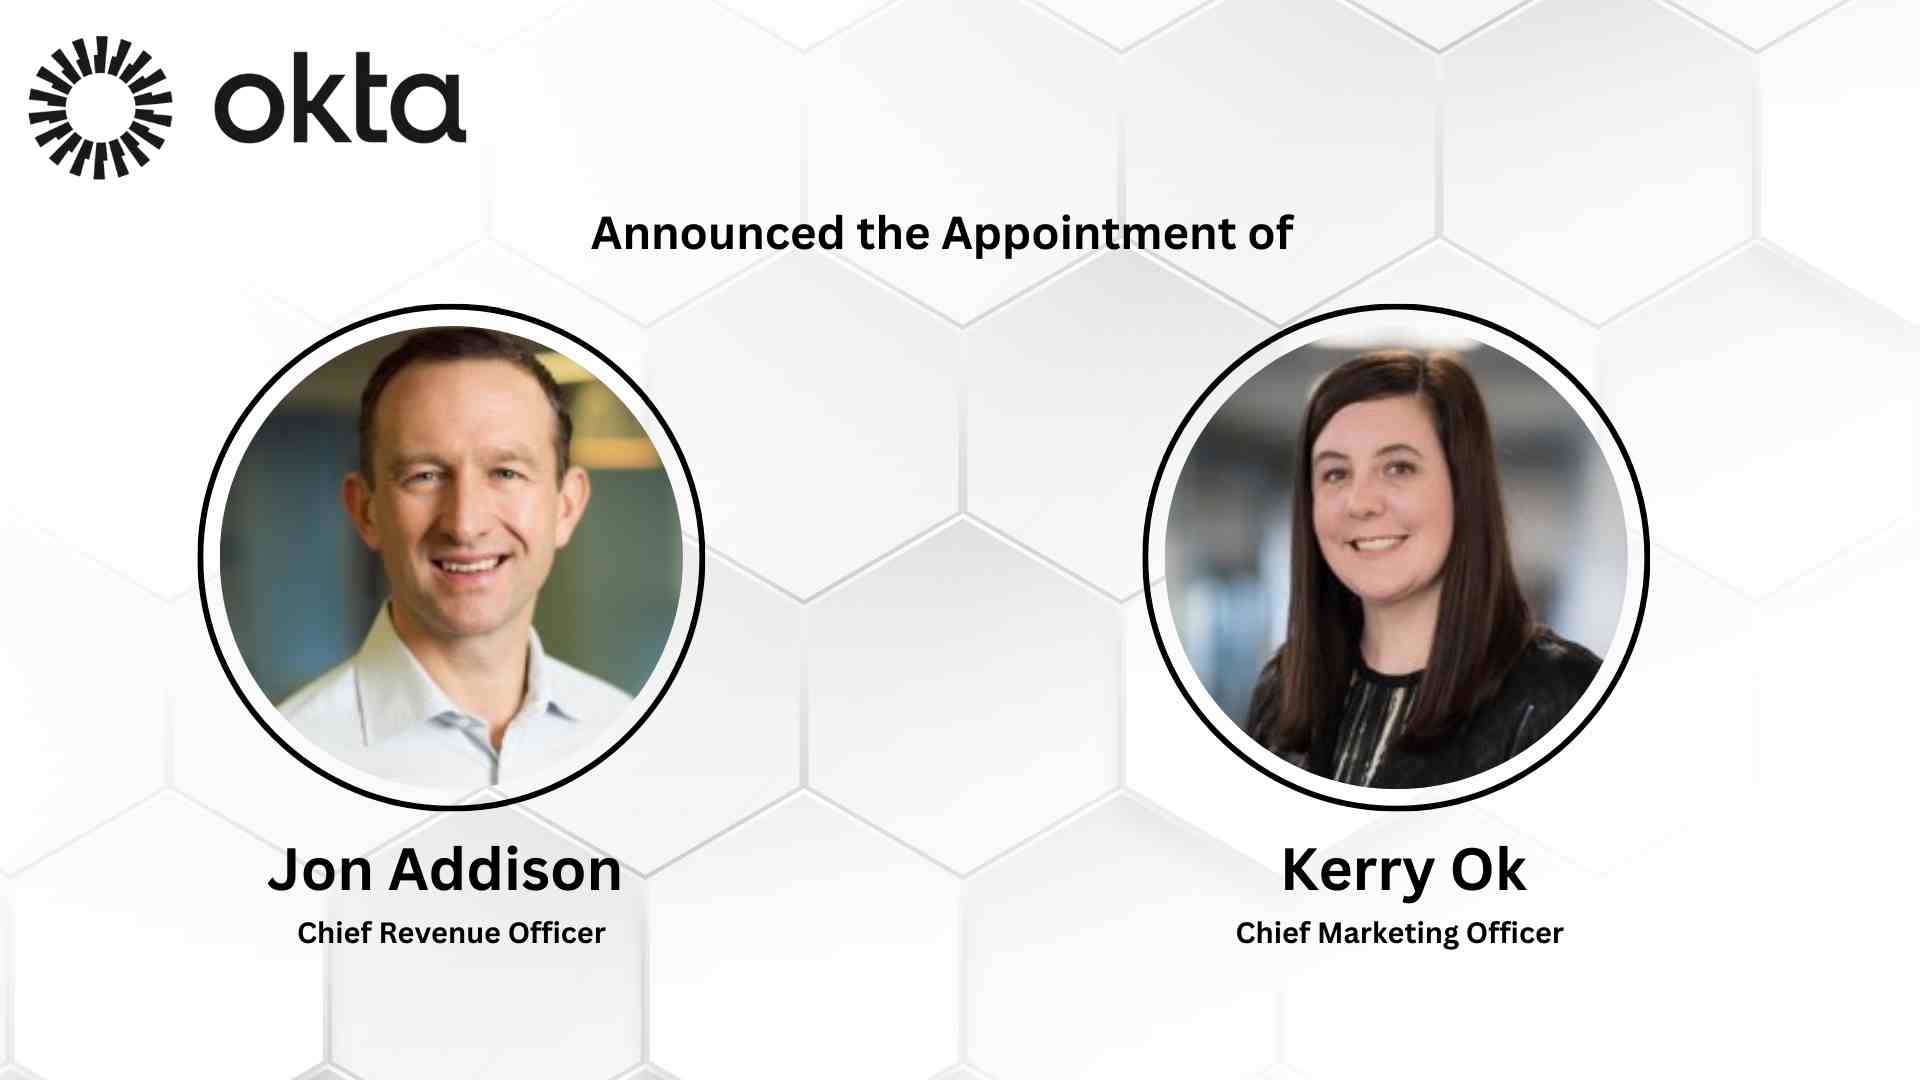 Okta Appoints Jon Addison as Chief Revenue Officer and Kerry Ok as Chief Marketing Officer